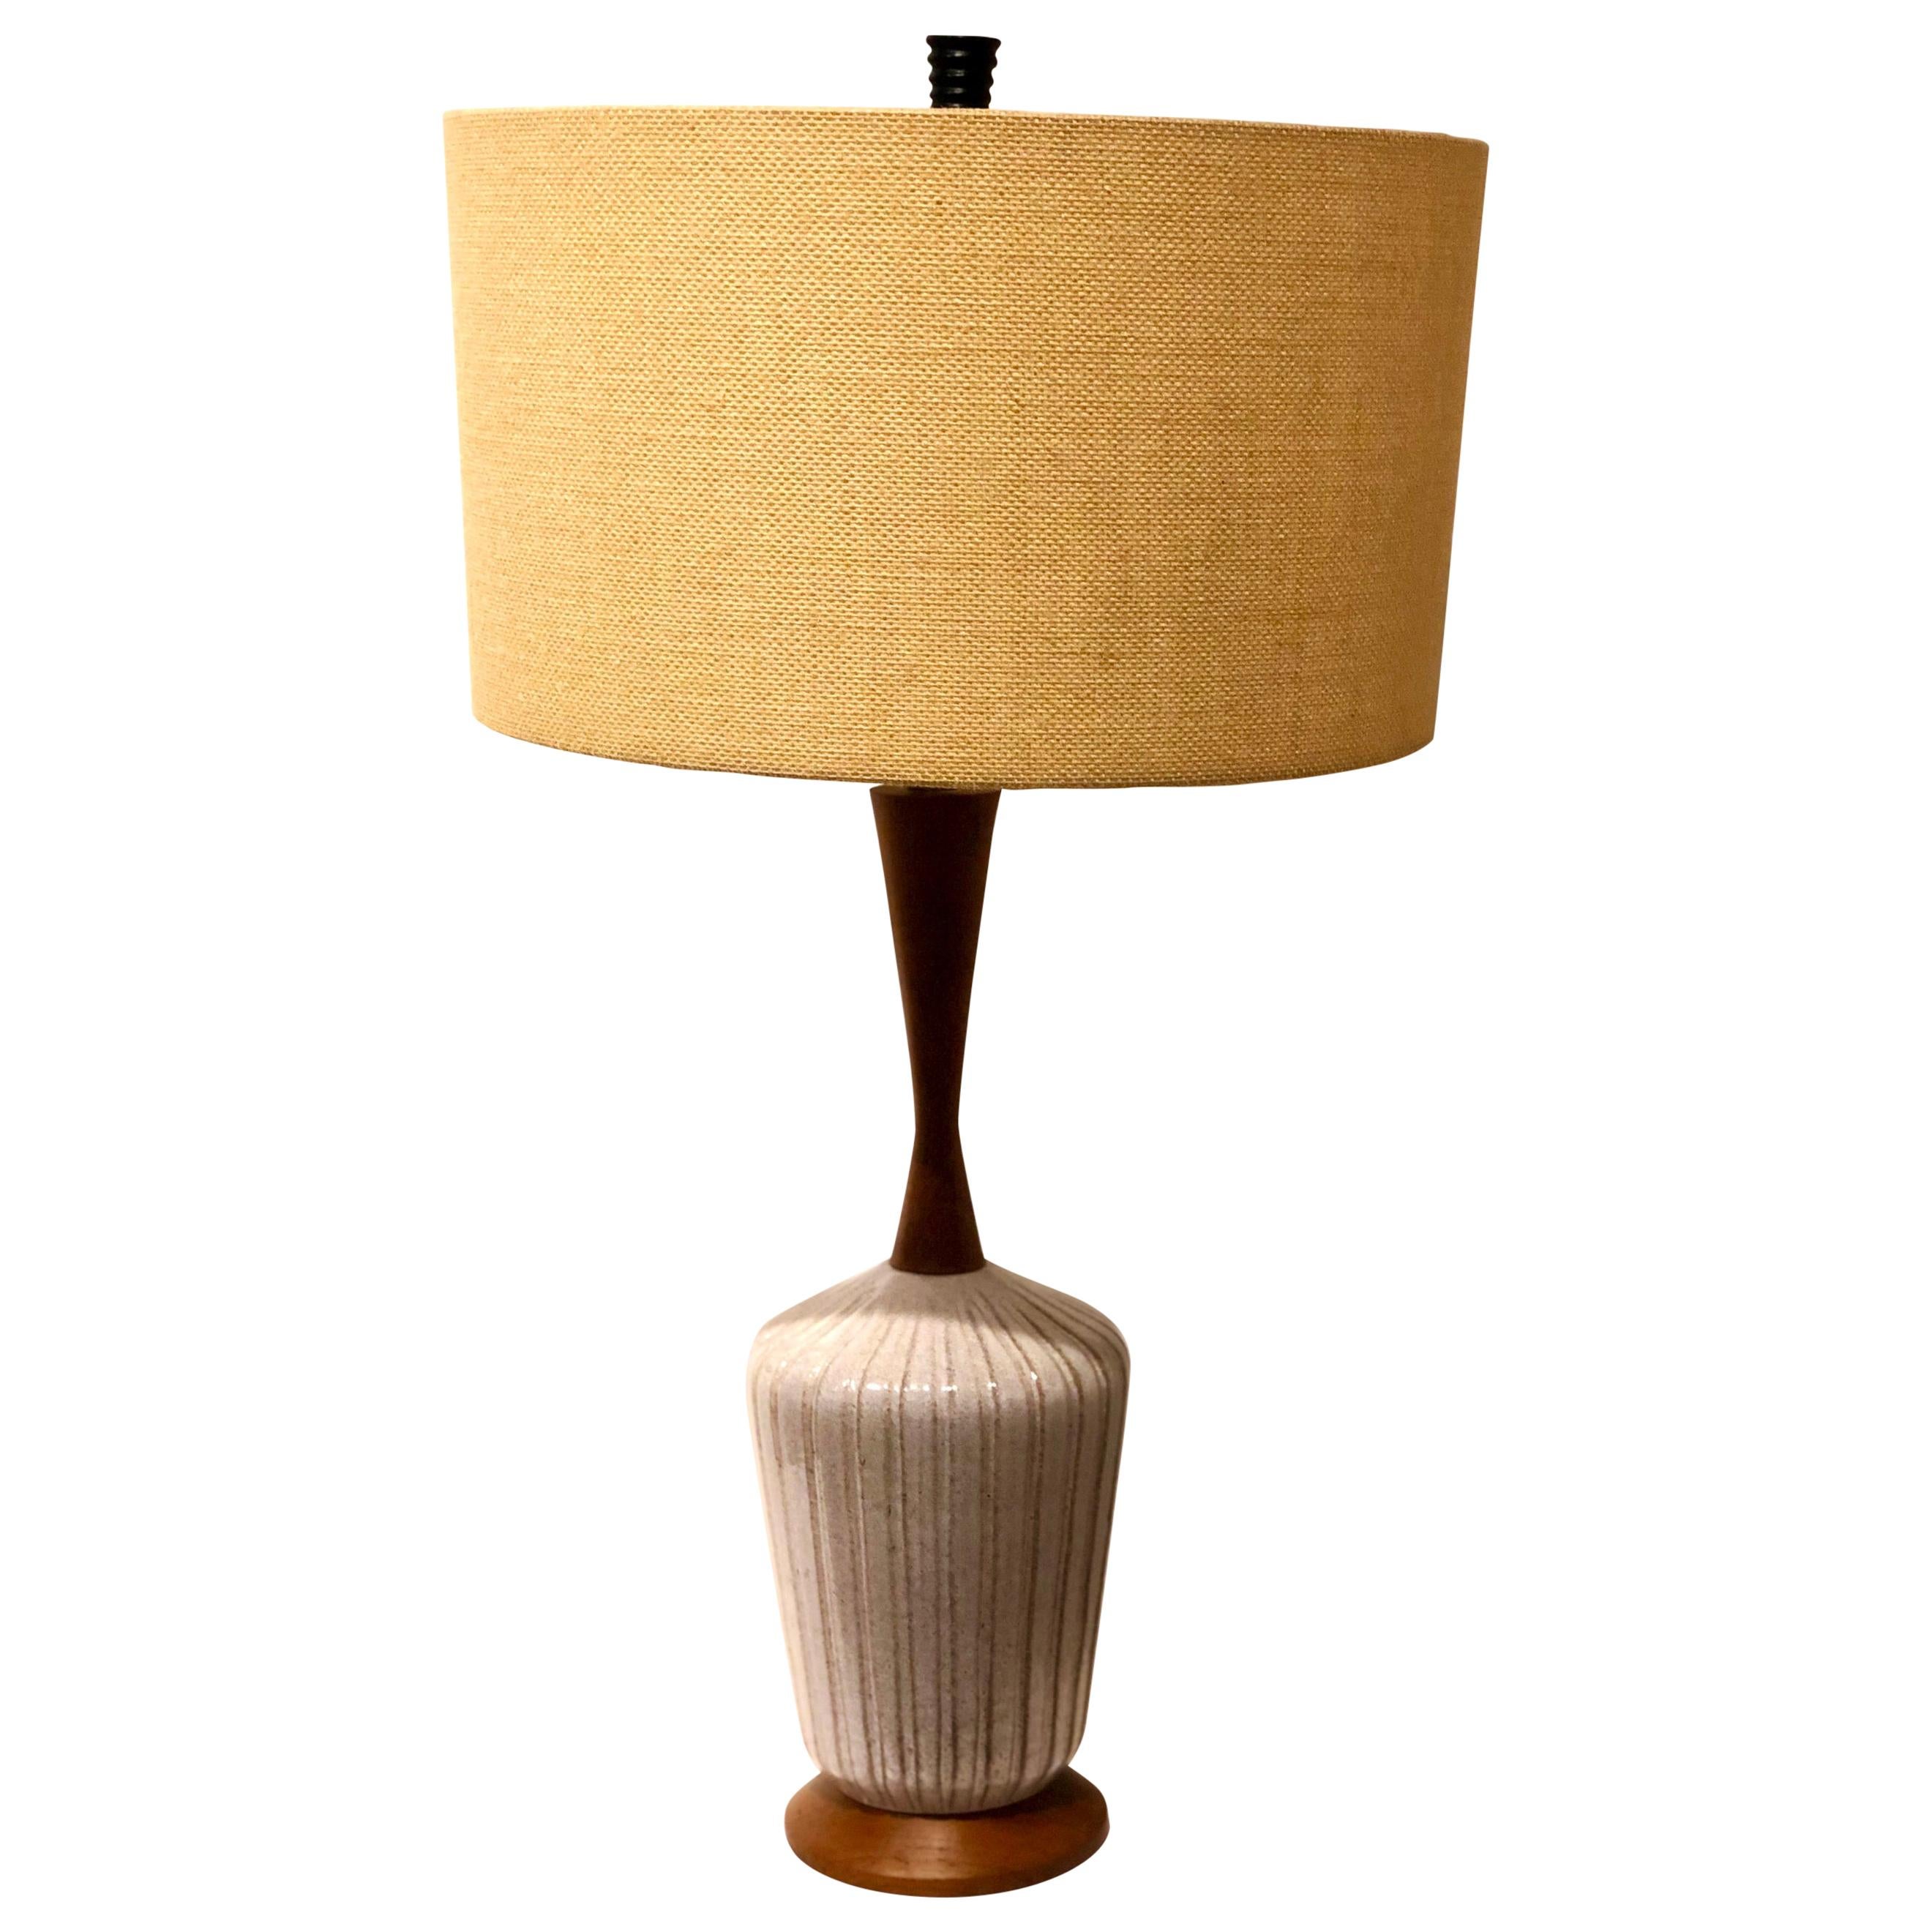 American Mid-Century Modern Ceramic Lamp with Walnut Accents